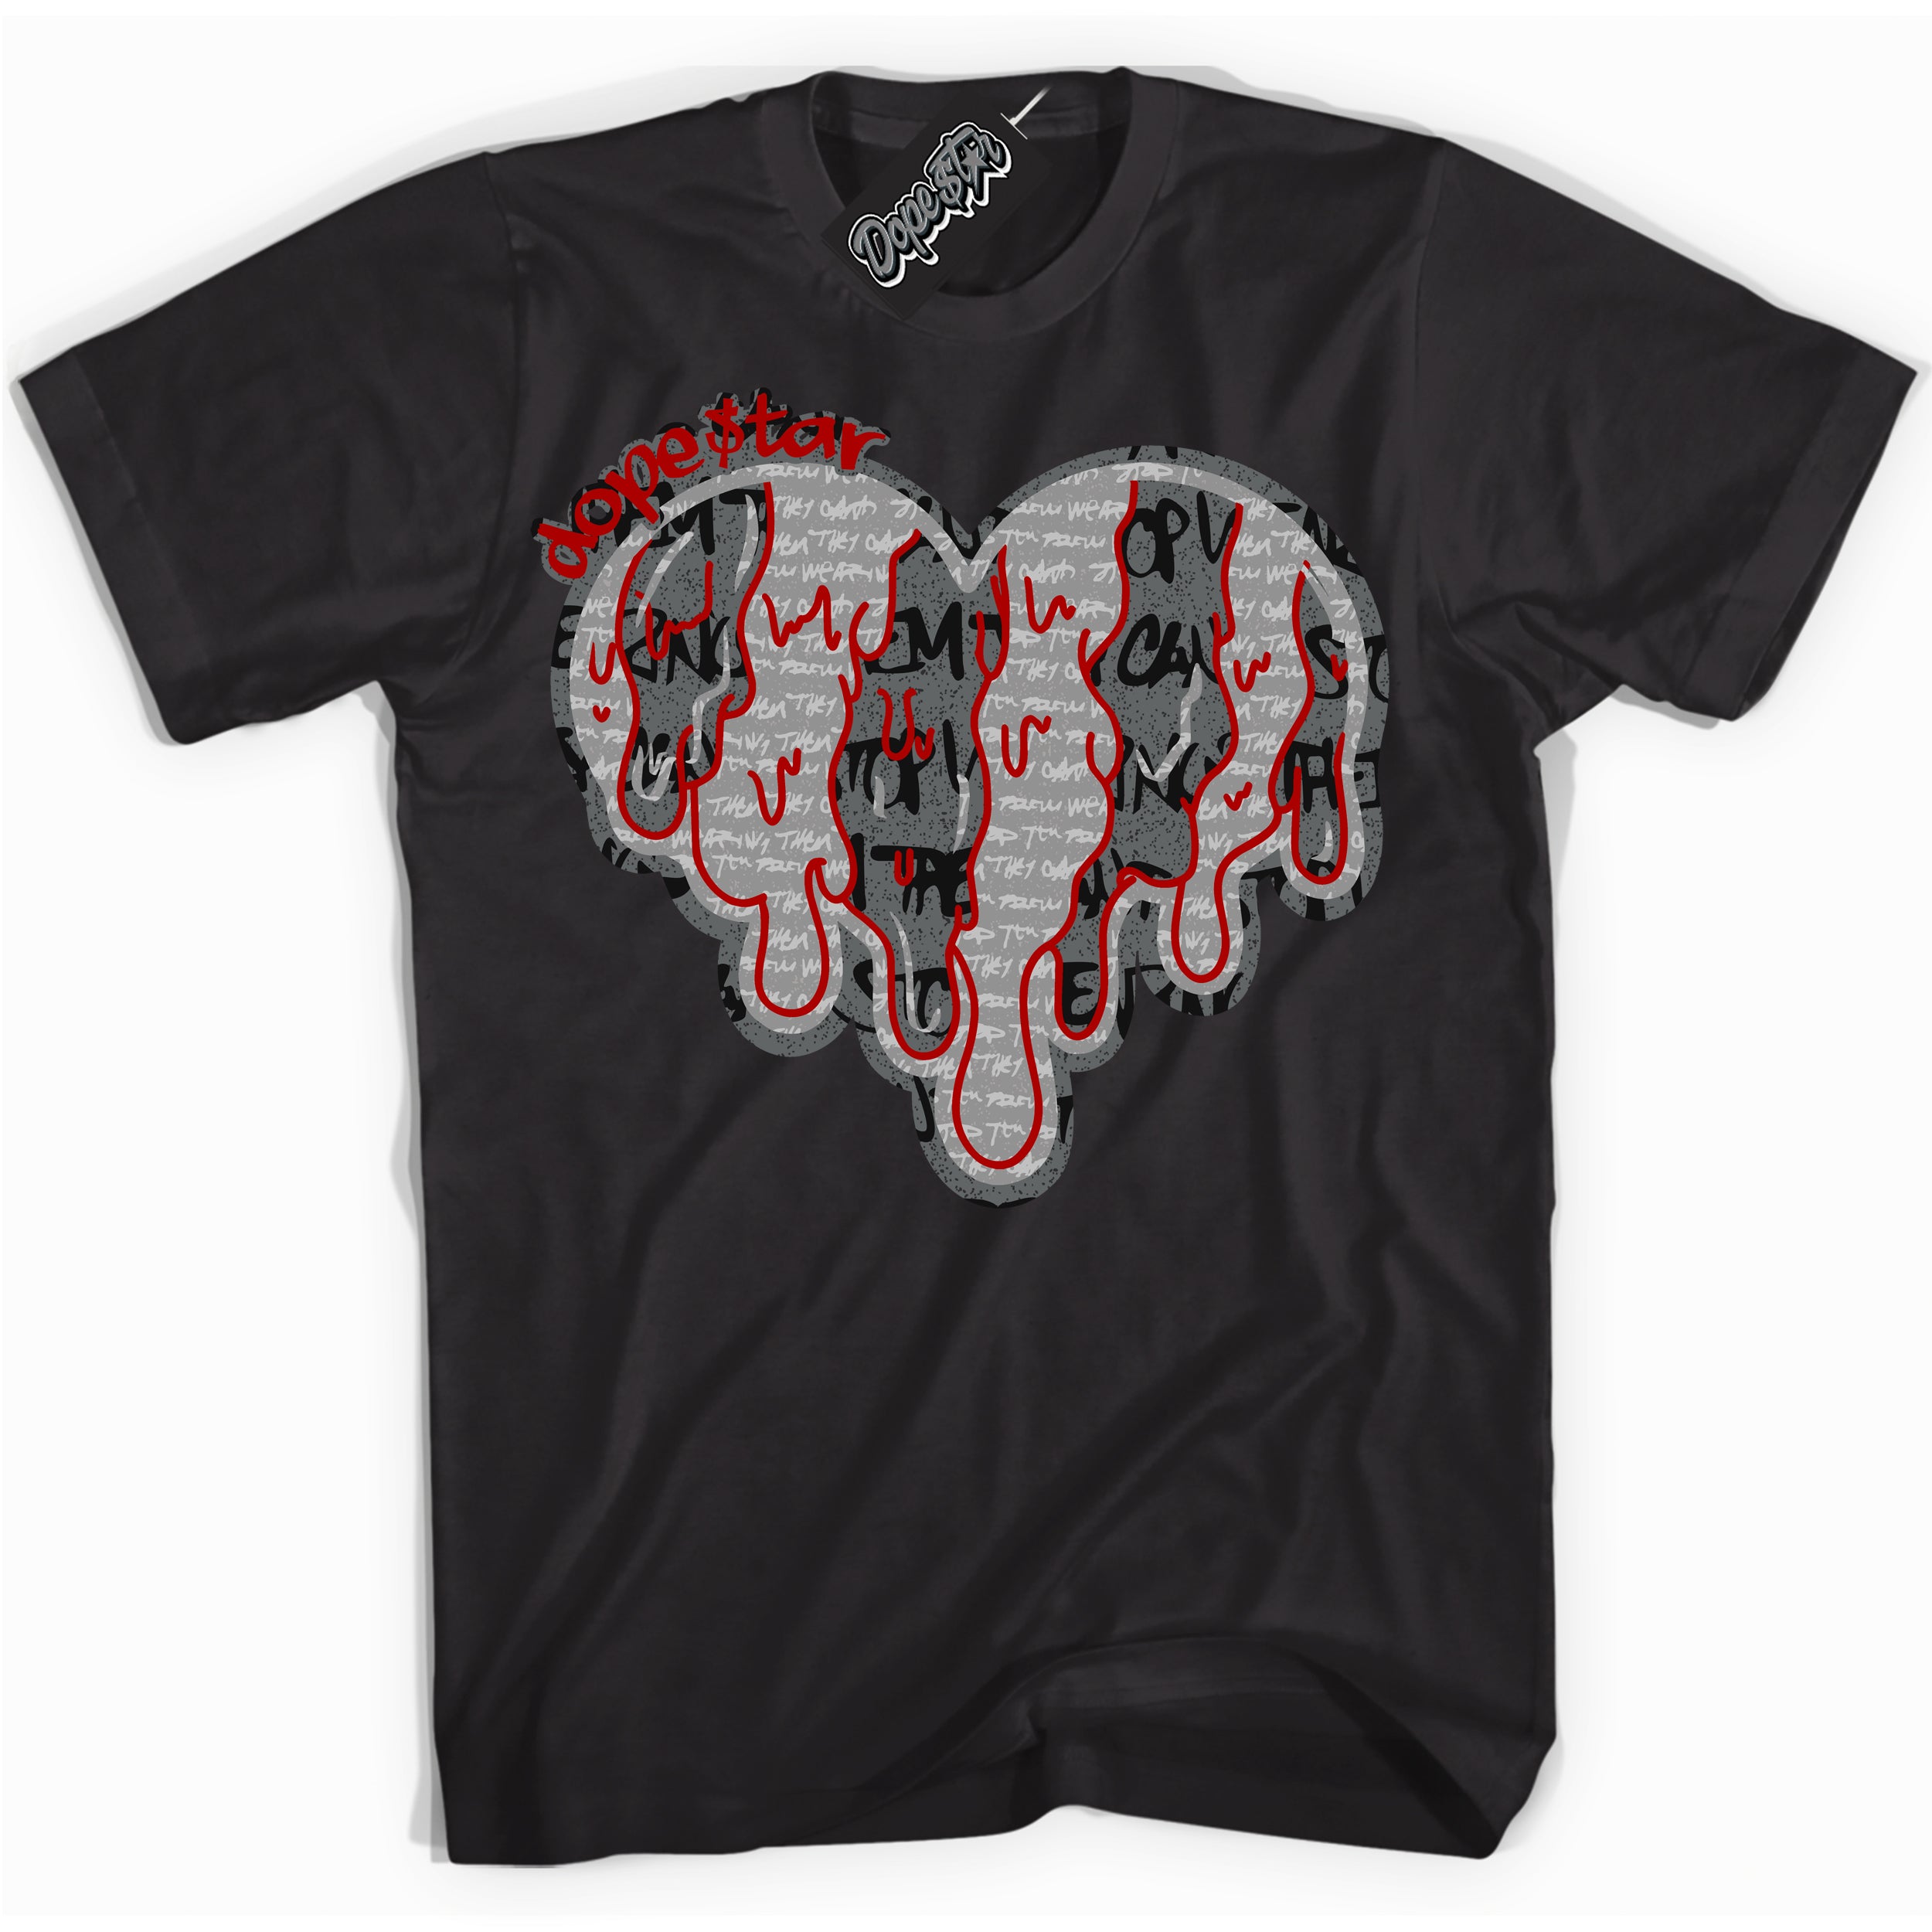 Cool Black Shirt with “ Melting Heart ” design that perfectly matches Rebellionaire 1s Sneakers.